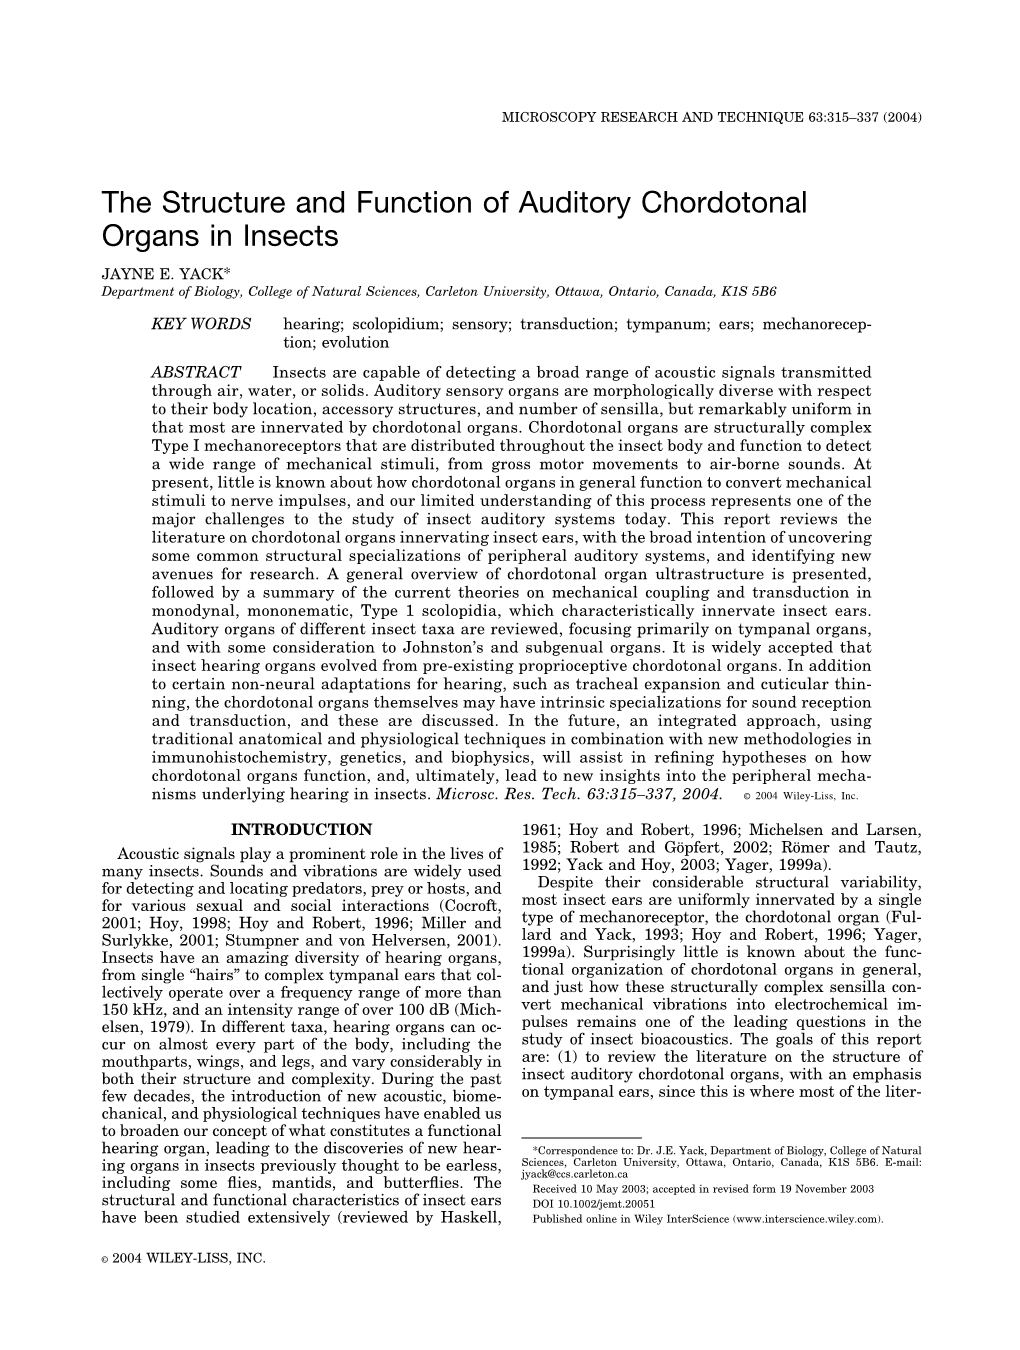 The Structure and Function of Auditory Chordotonal Organs in Insects